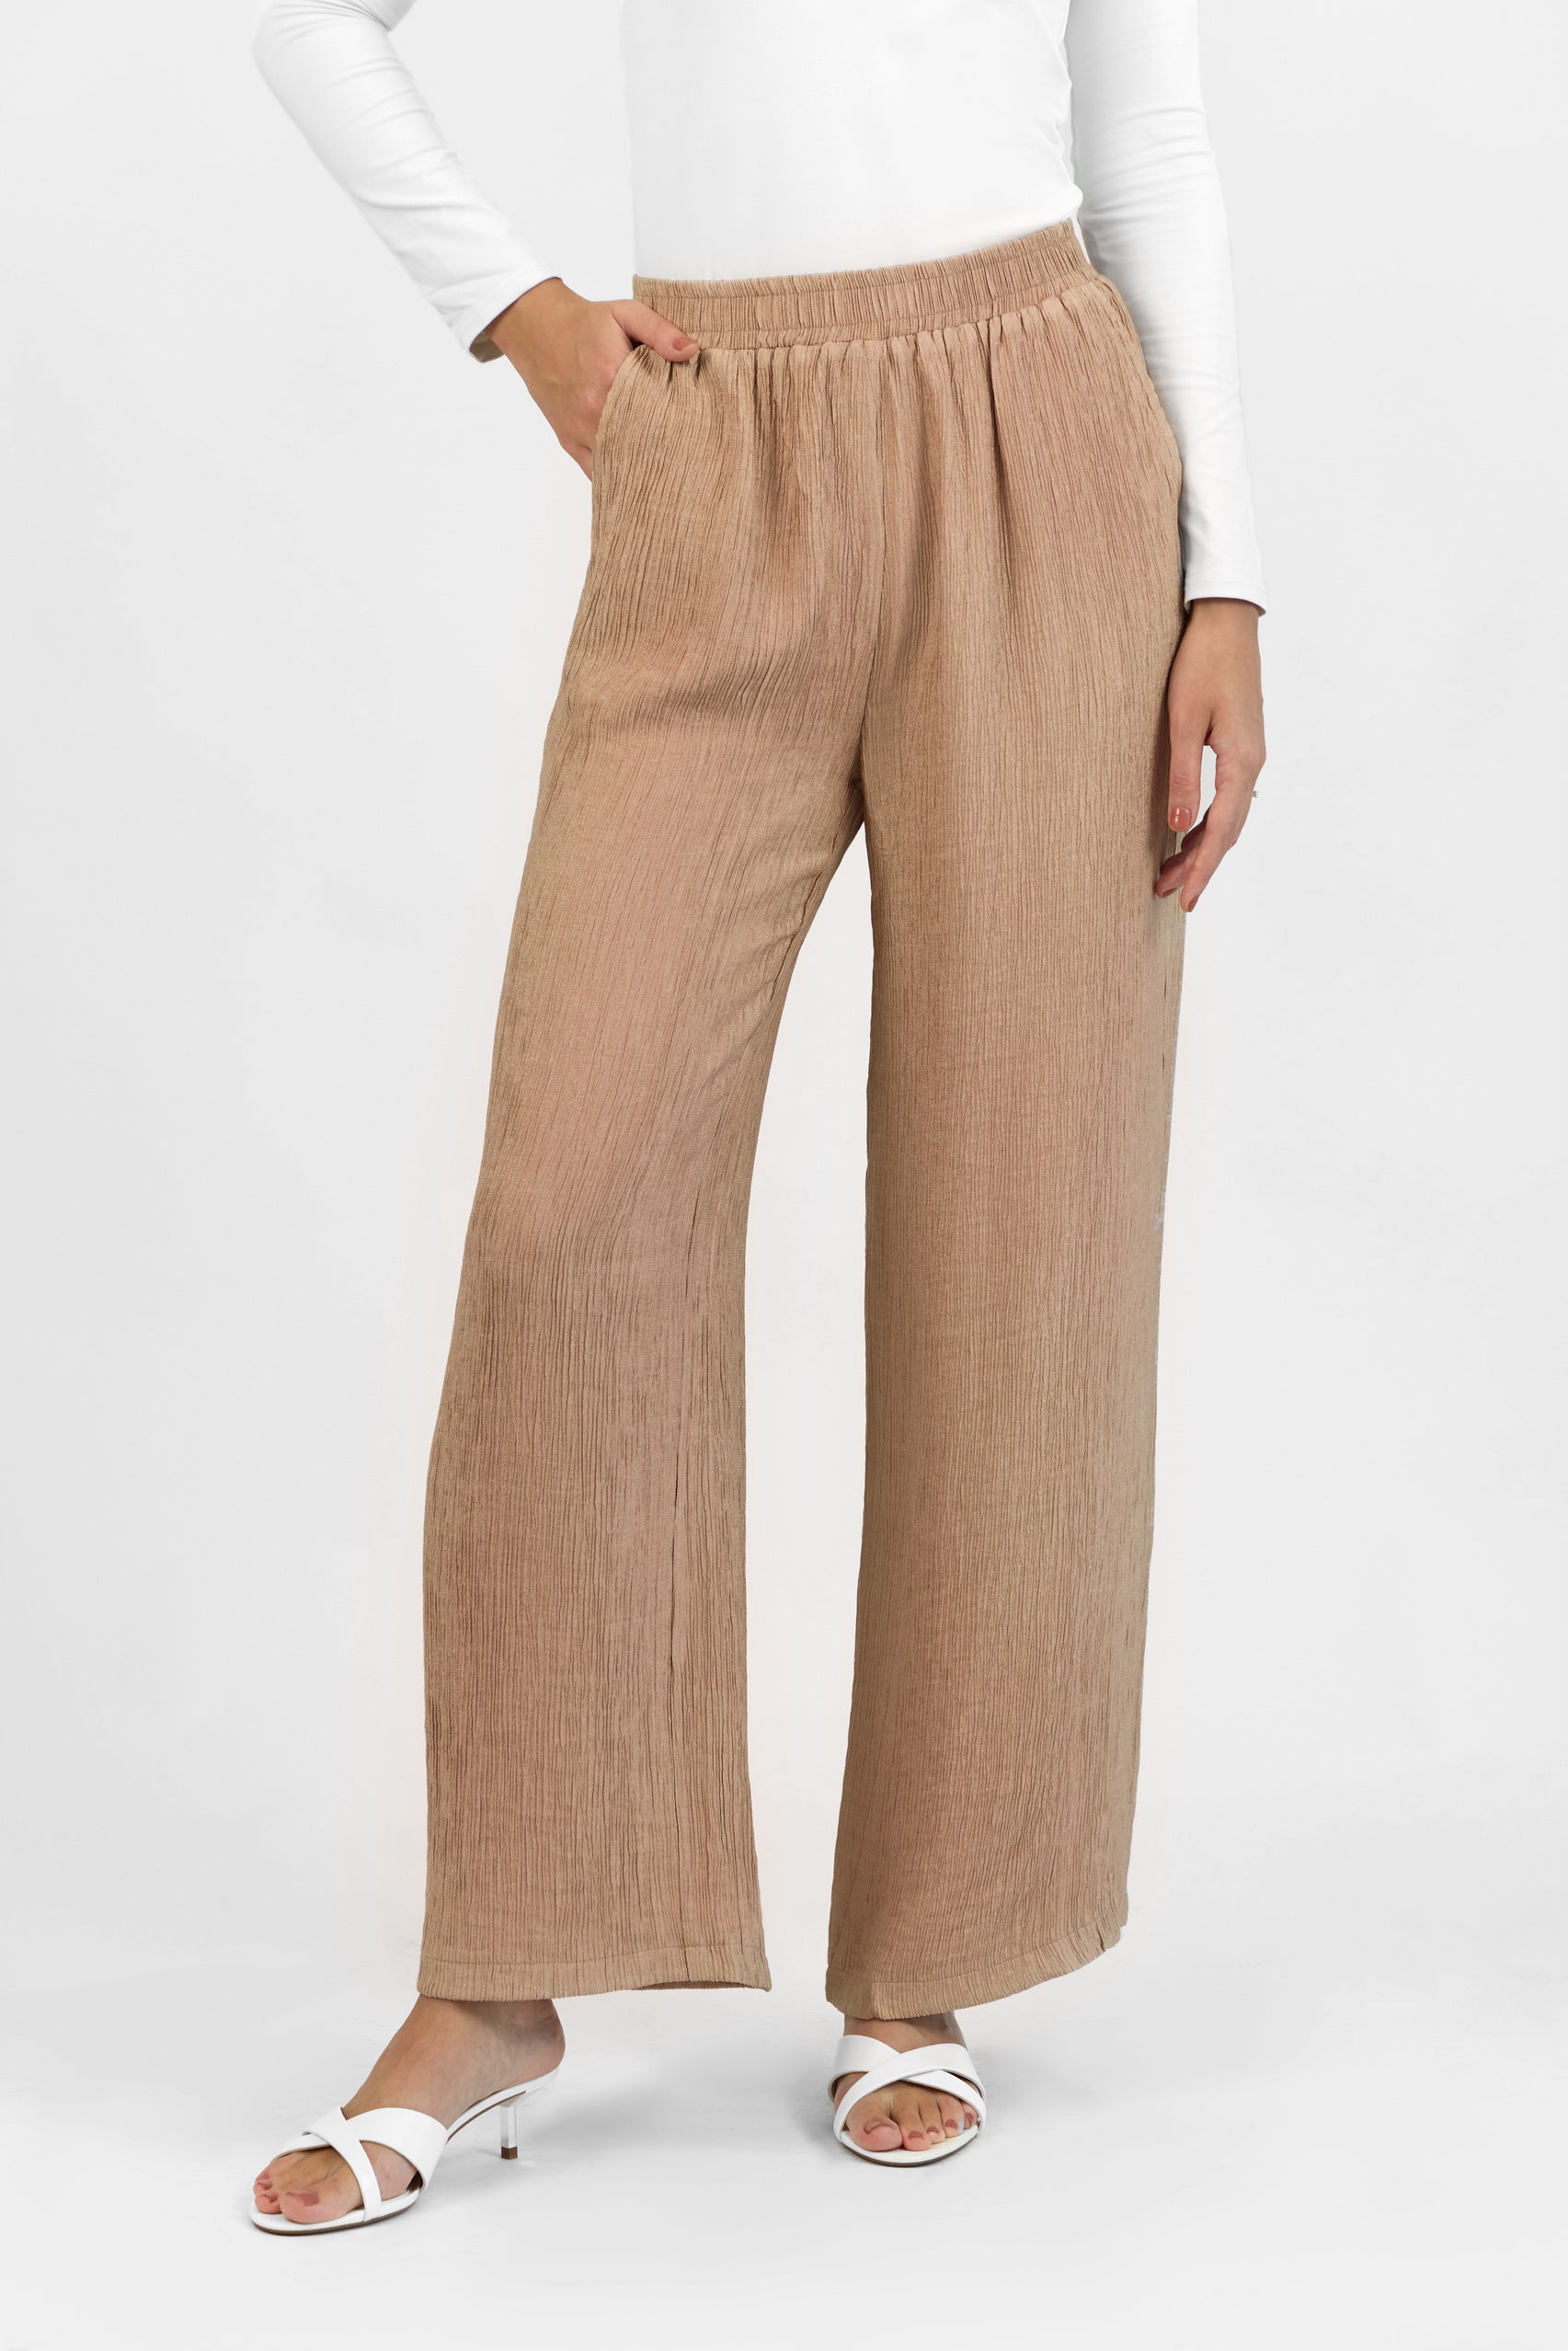 AE - Rippled Relaxed Fit Pants - Shell